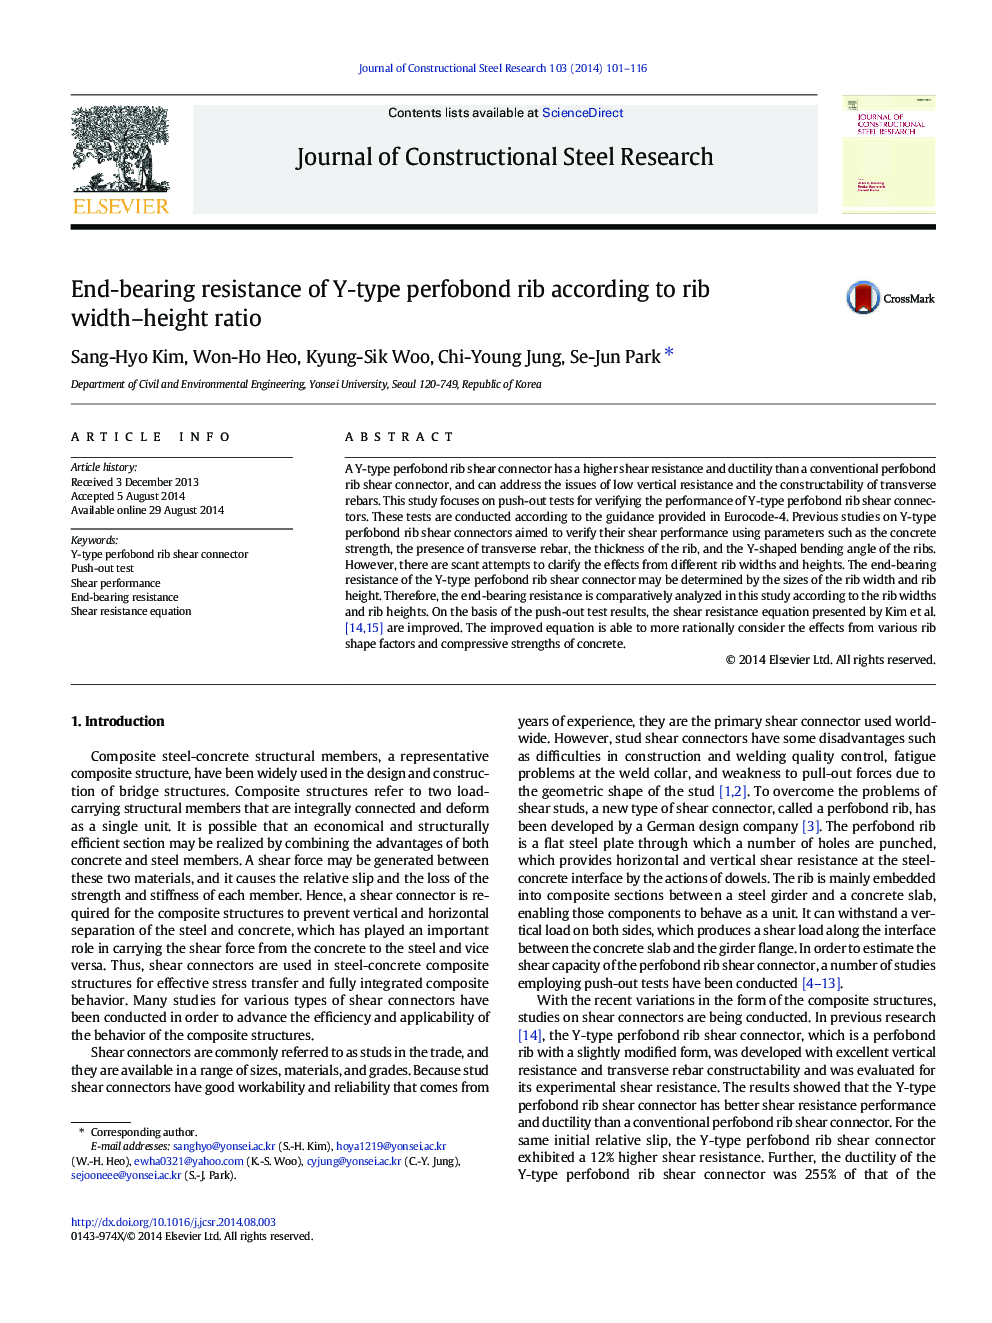 End-bearing resistance of Y-type perfobond rib according to rib width–height ratio